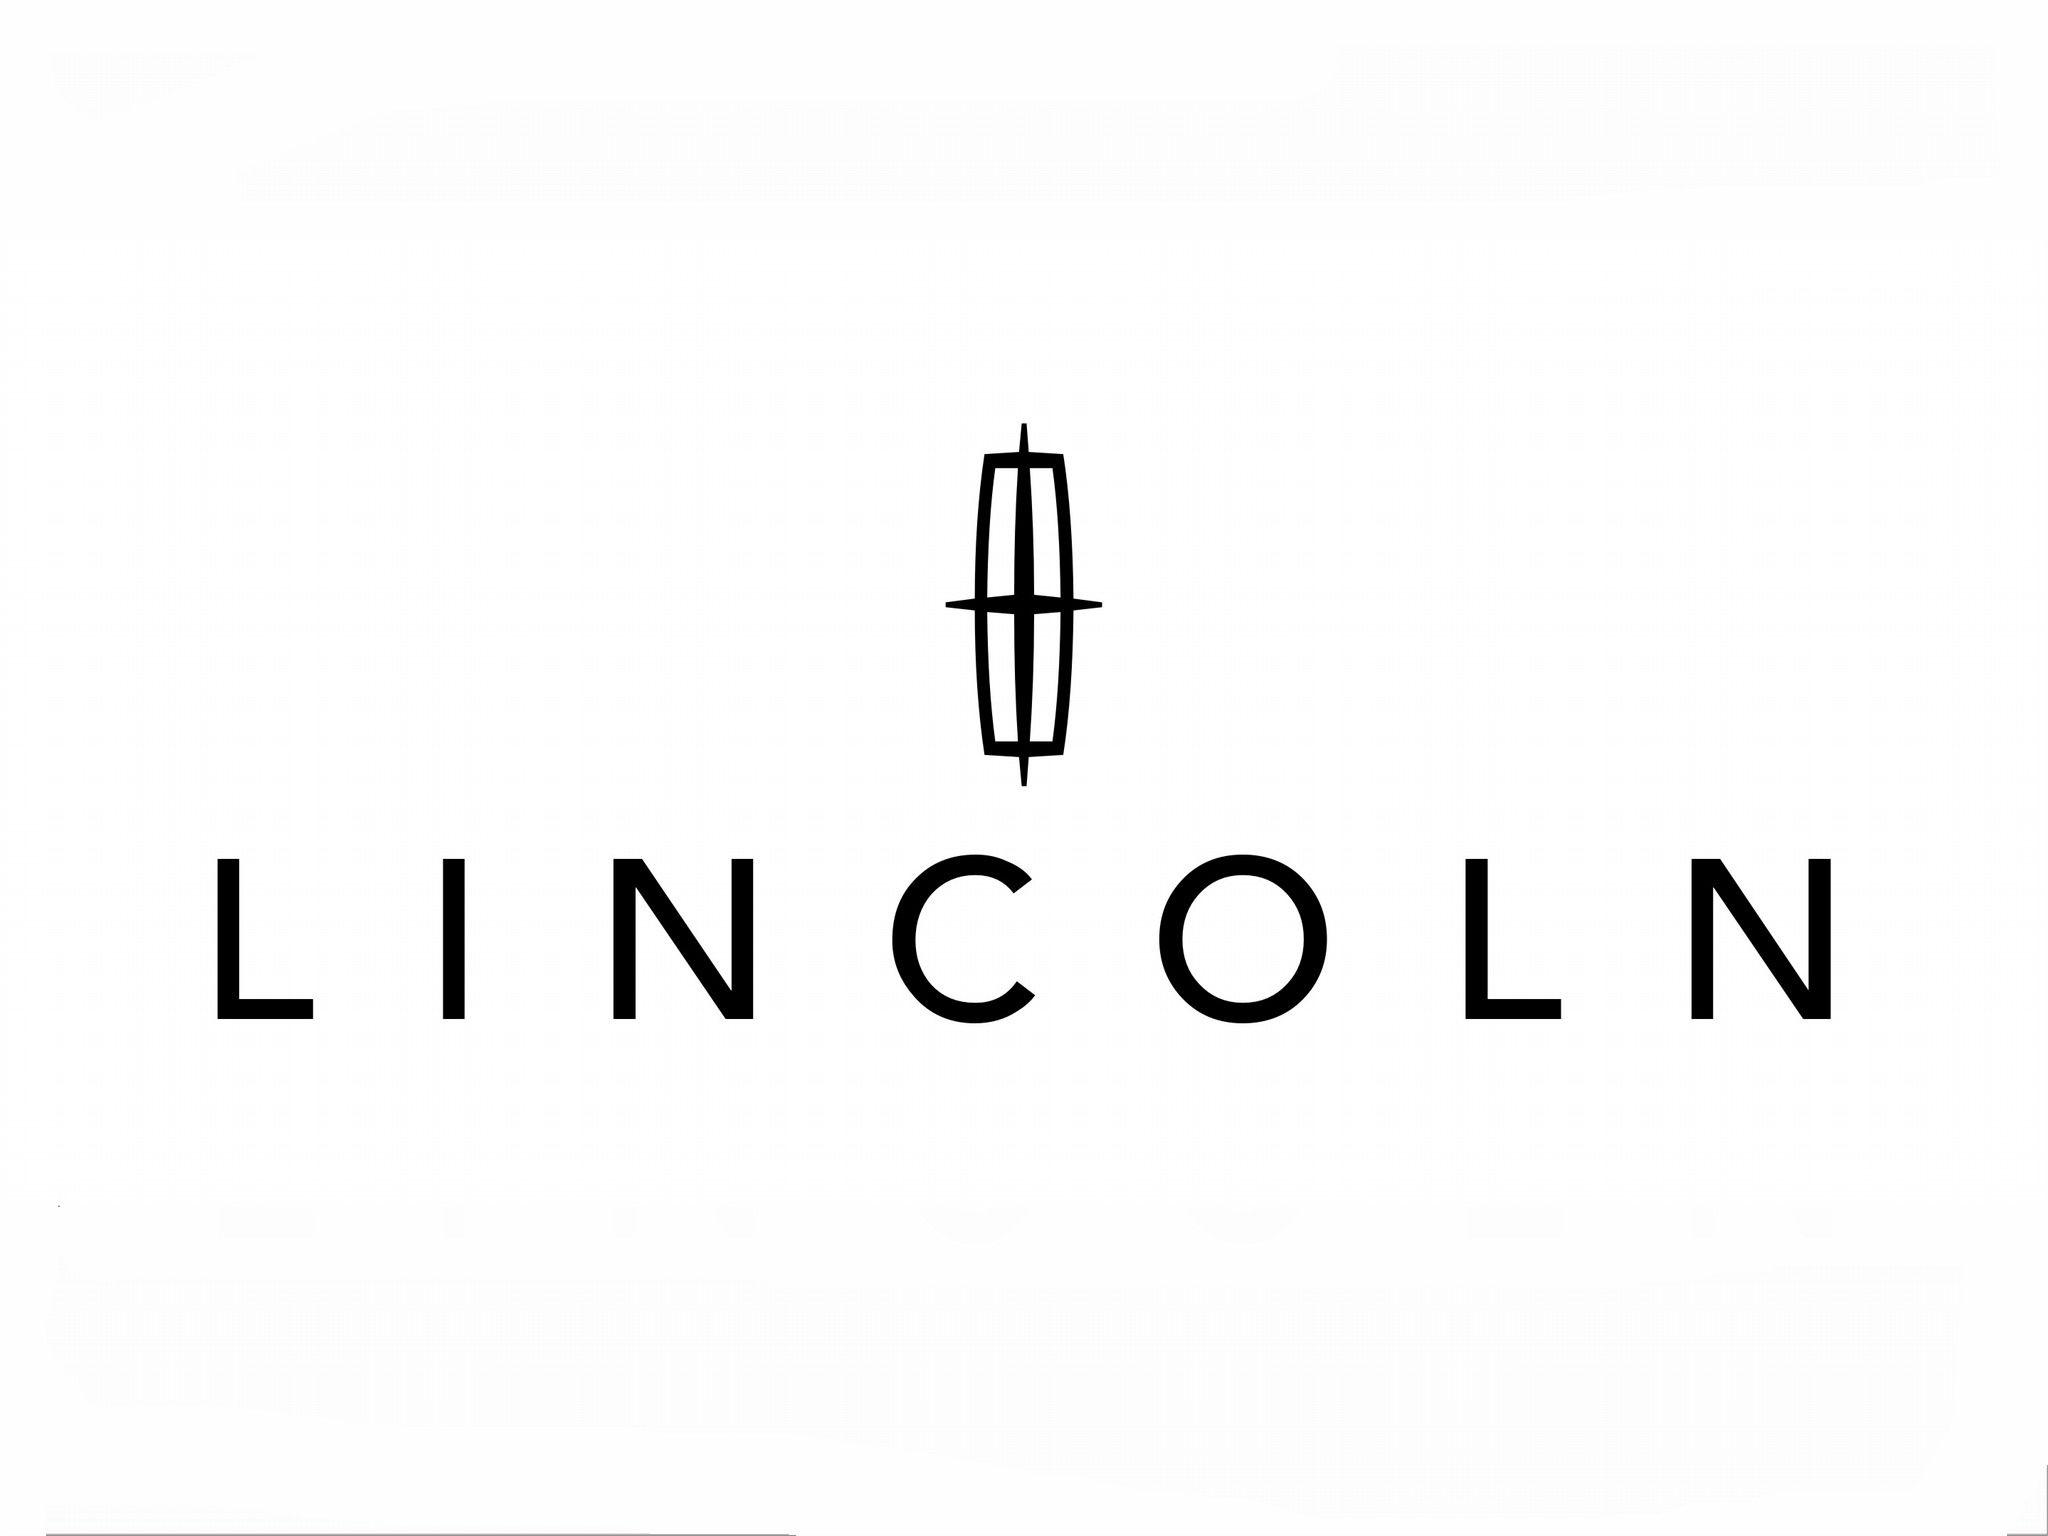 Ford Lincoln Logo - Lincoln Logo, Lincoln Car Symbol Meaning and History | Car Brand ...